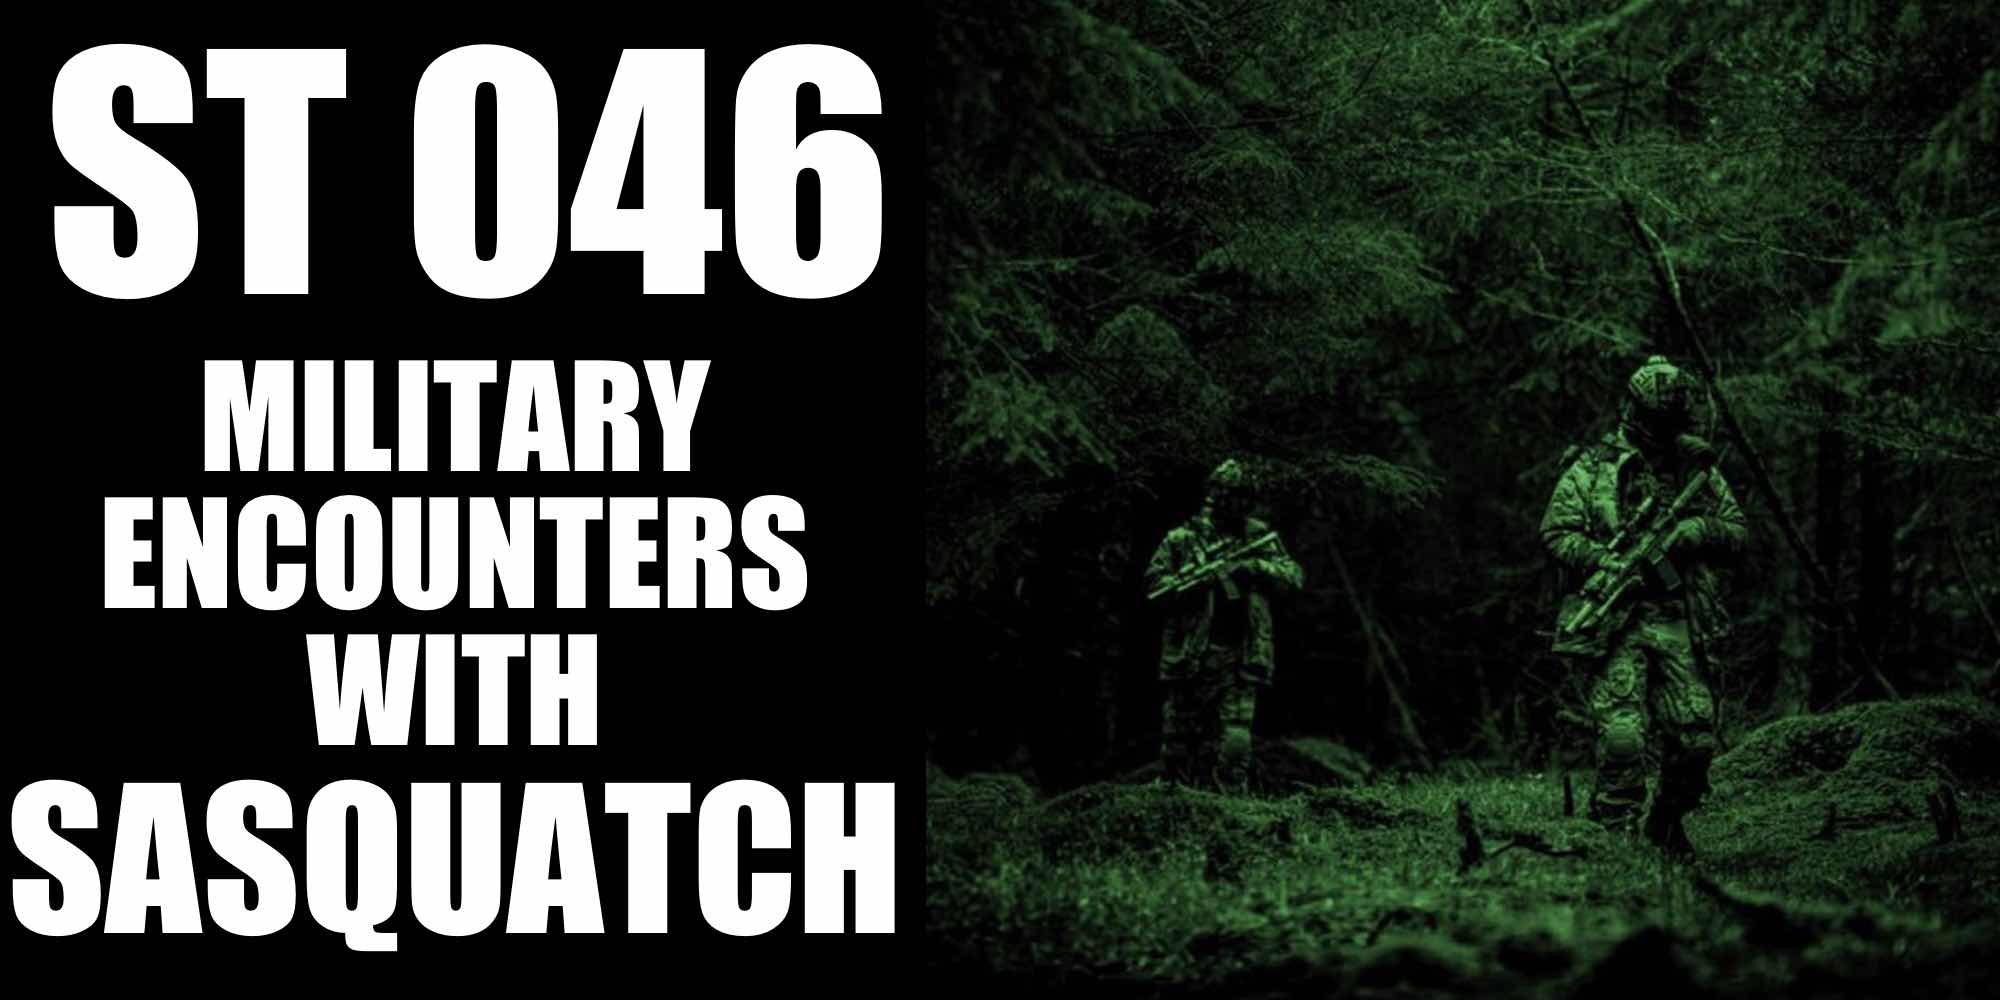 military encounters with Sasquatch